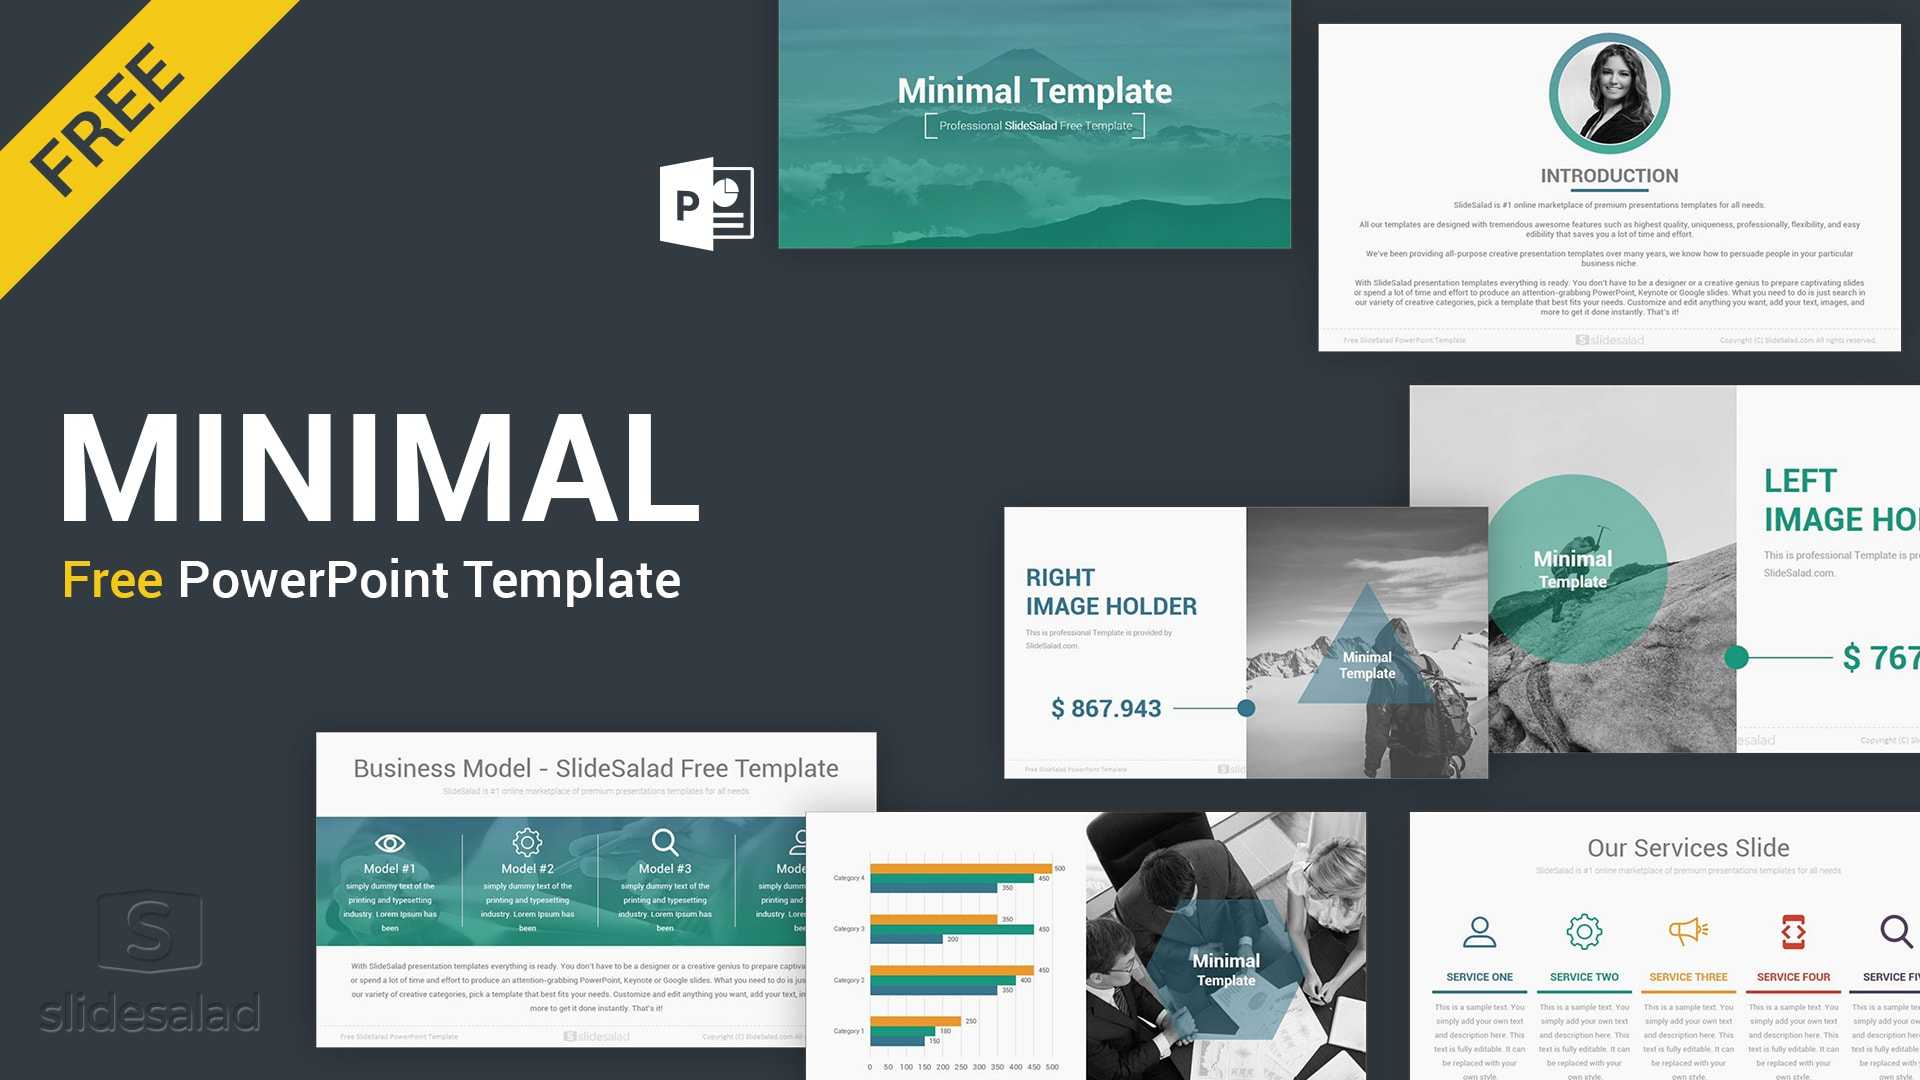 Best Free Presentation Templates Professional Designs 2020 For Powerpoint Photo Slideshow Template